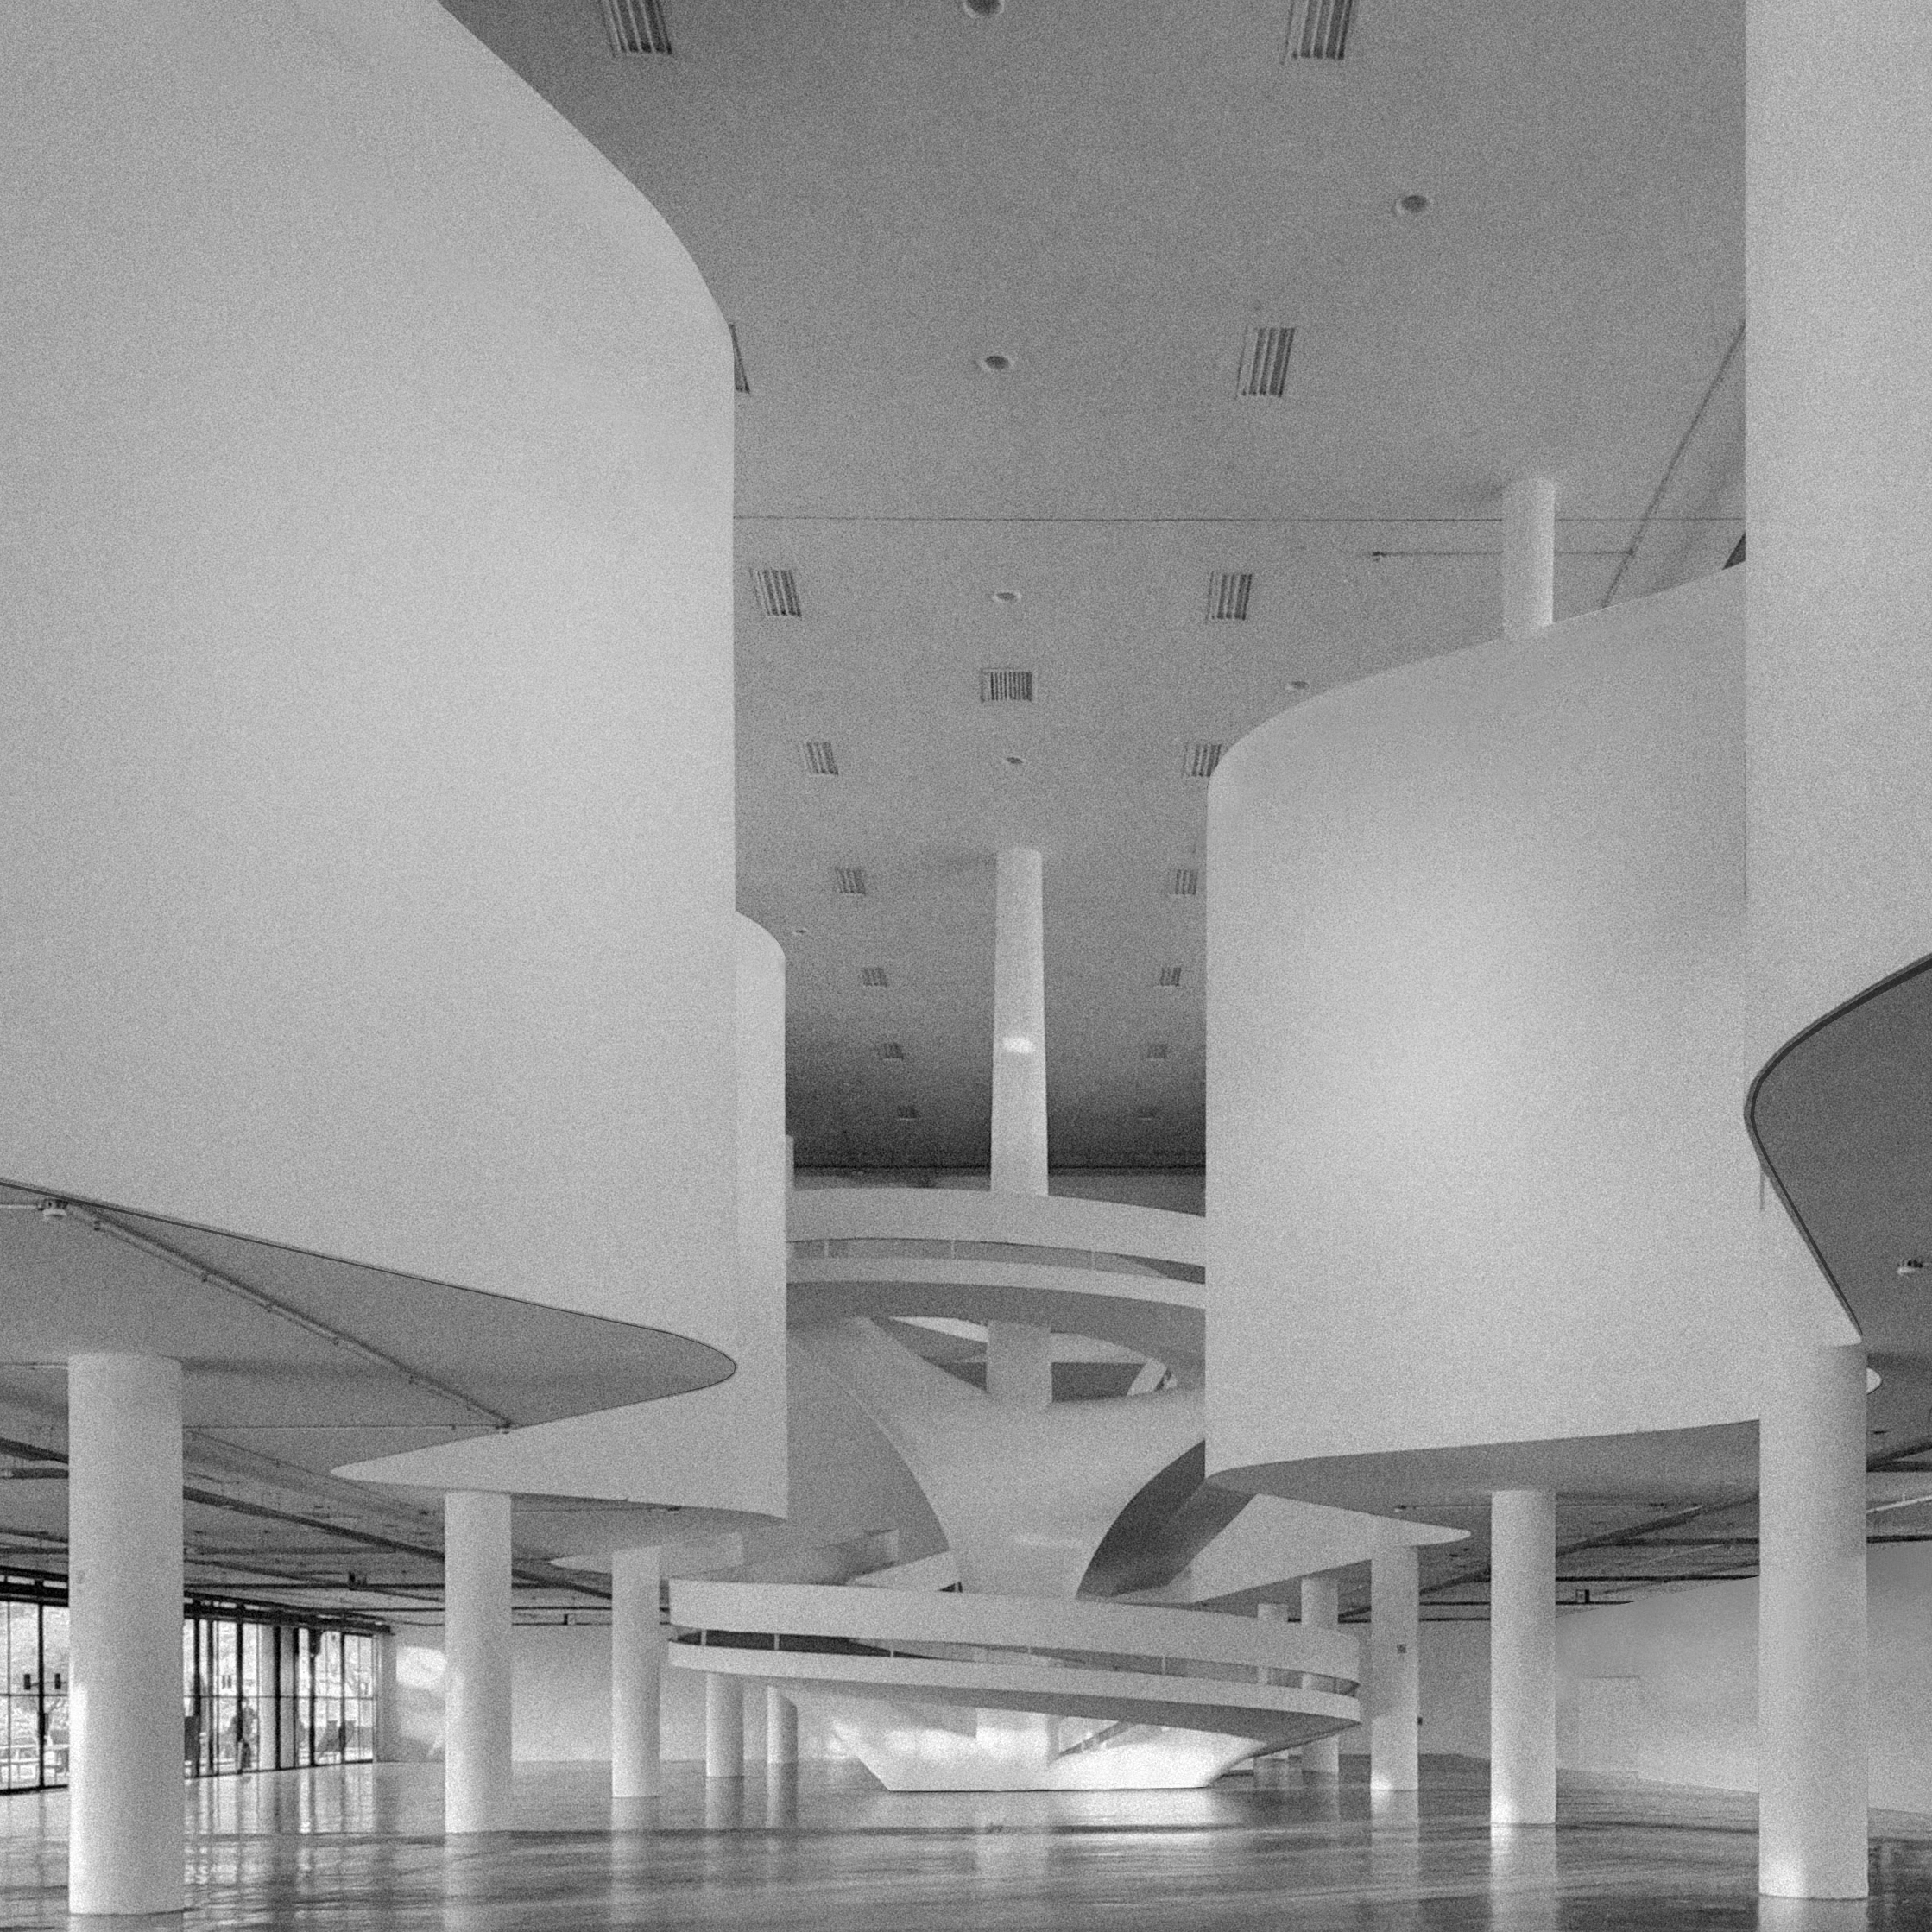 Image of the central opening of the Bienal Pavilion in black and white without people and with a wall that connects the second to the third floor